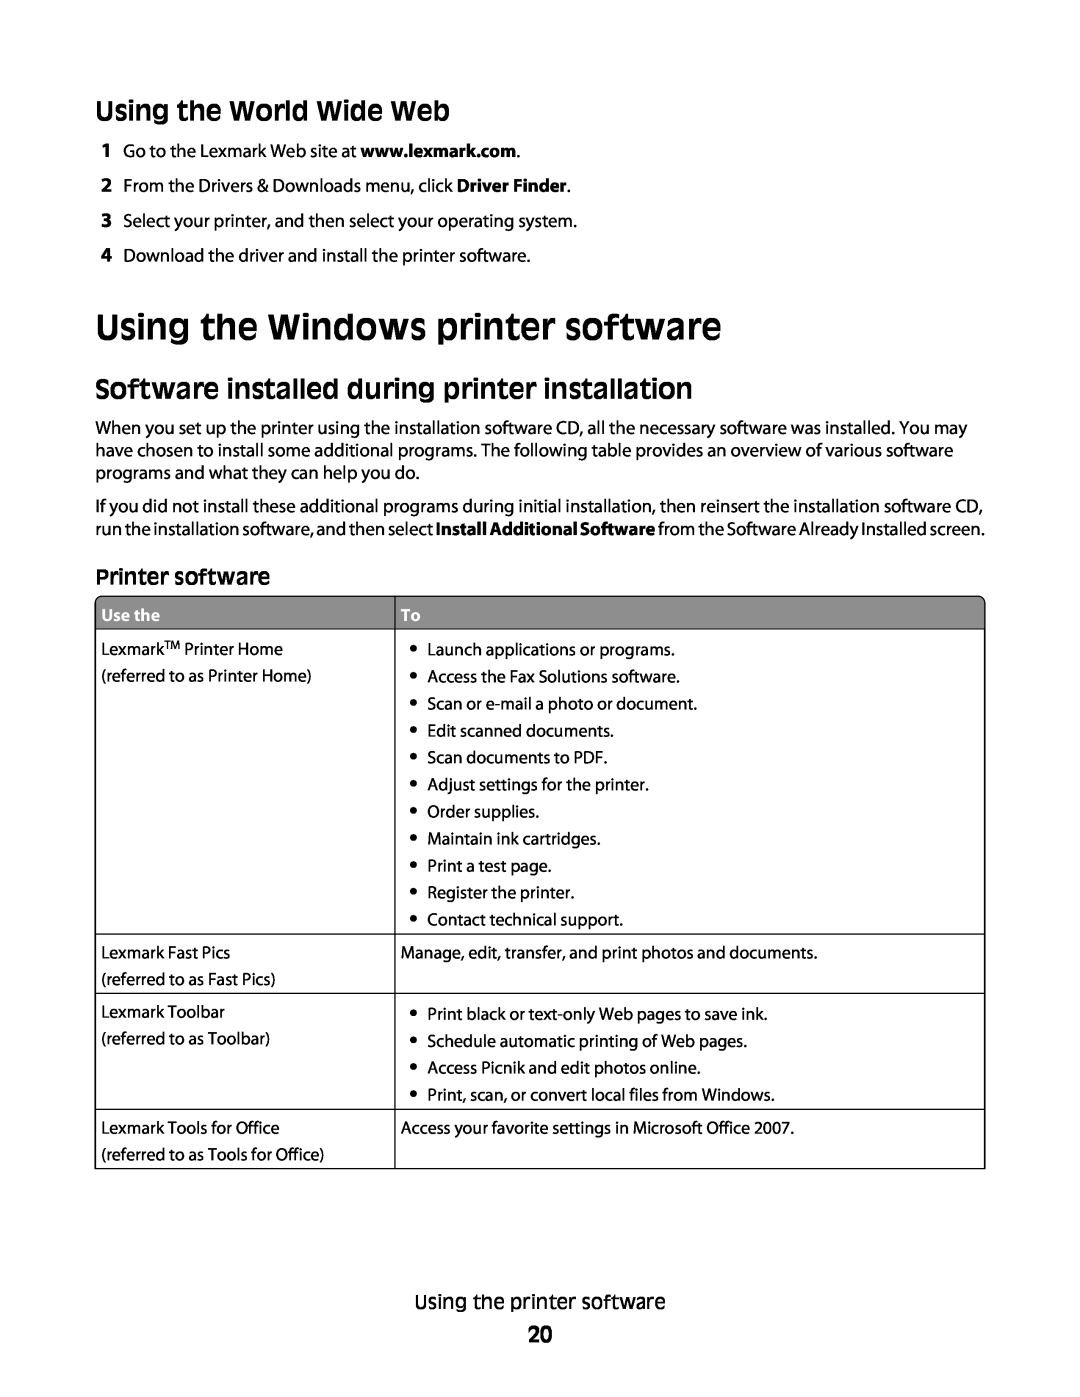 Lexmark S600 Using the Windows printer software, Using the World Wide Web, Software installed during printer installation 